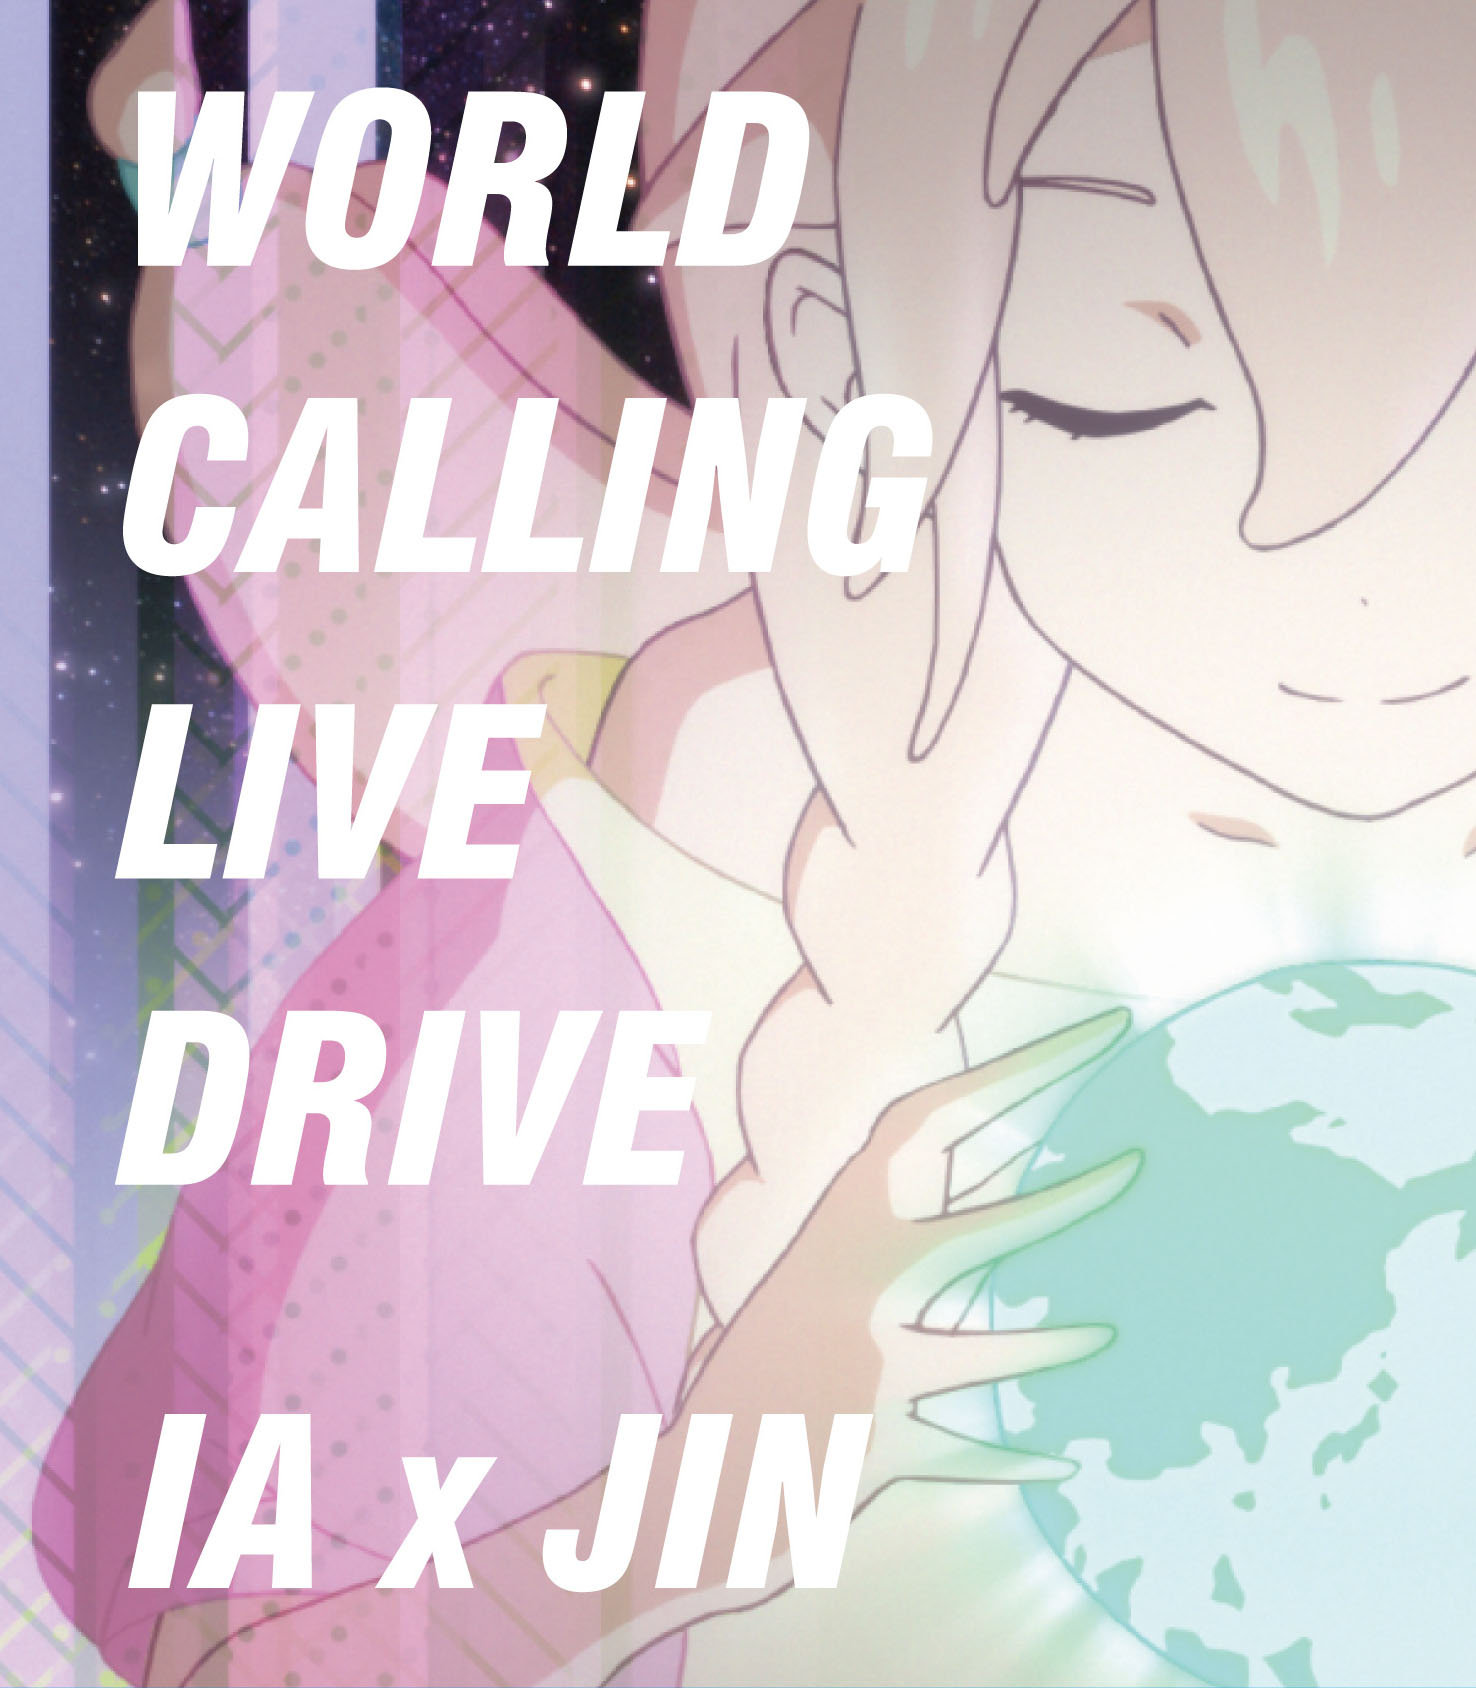 This is the world calling. Dream Worlds are calling you.